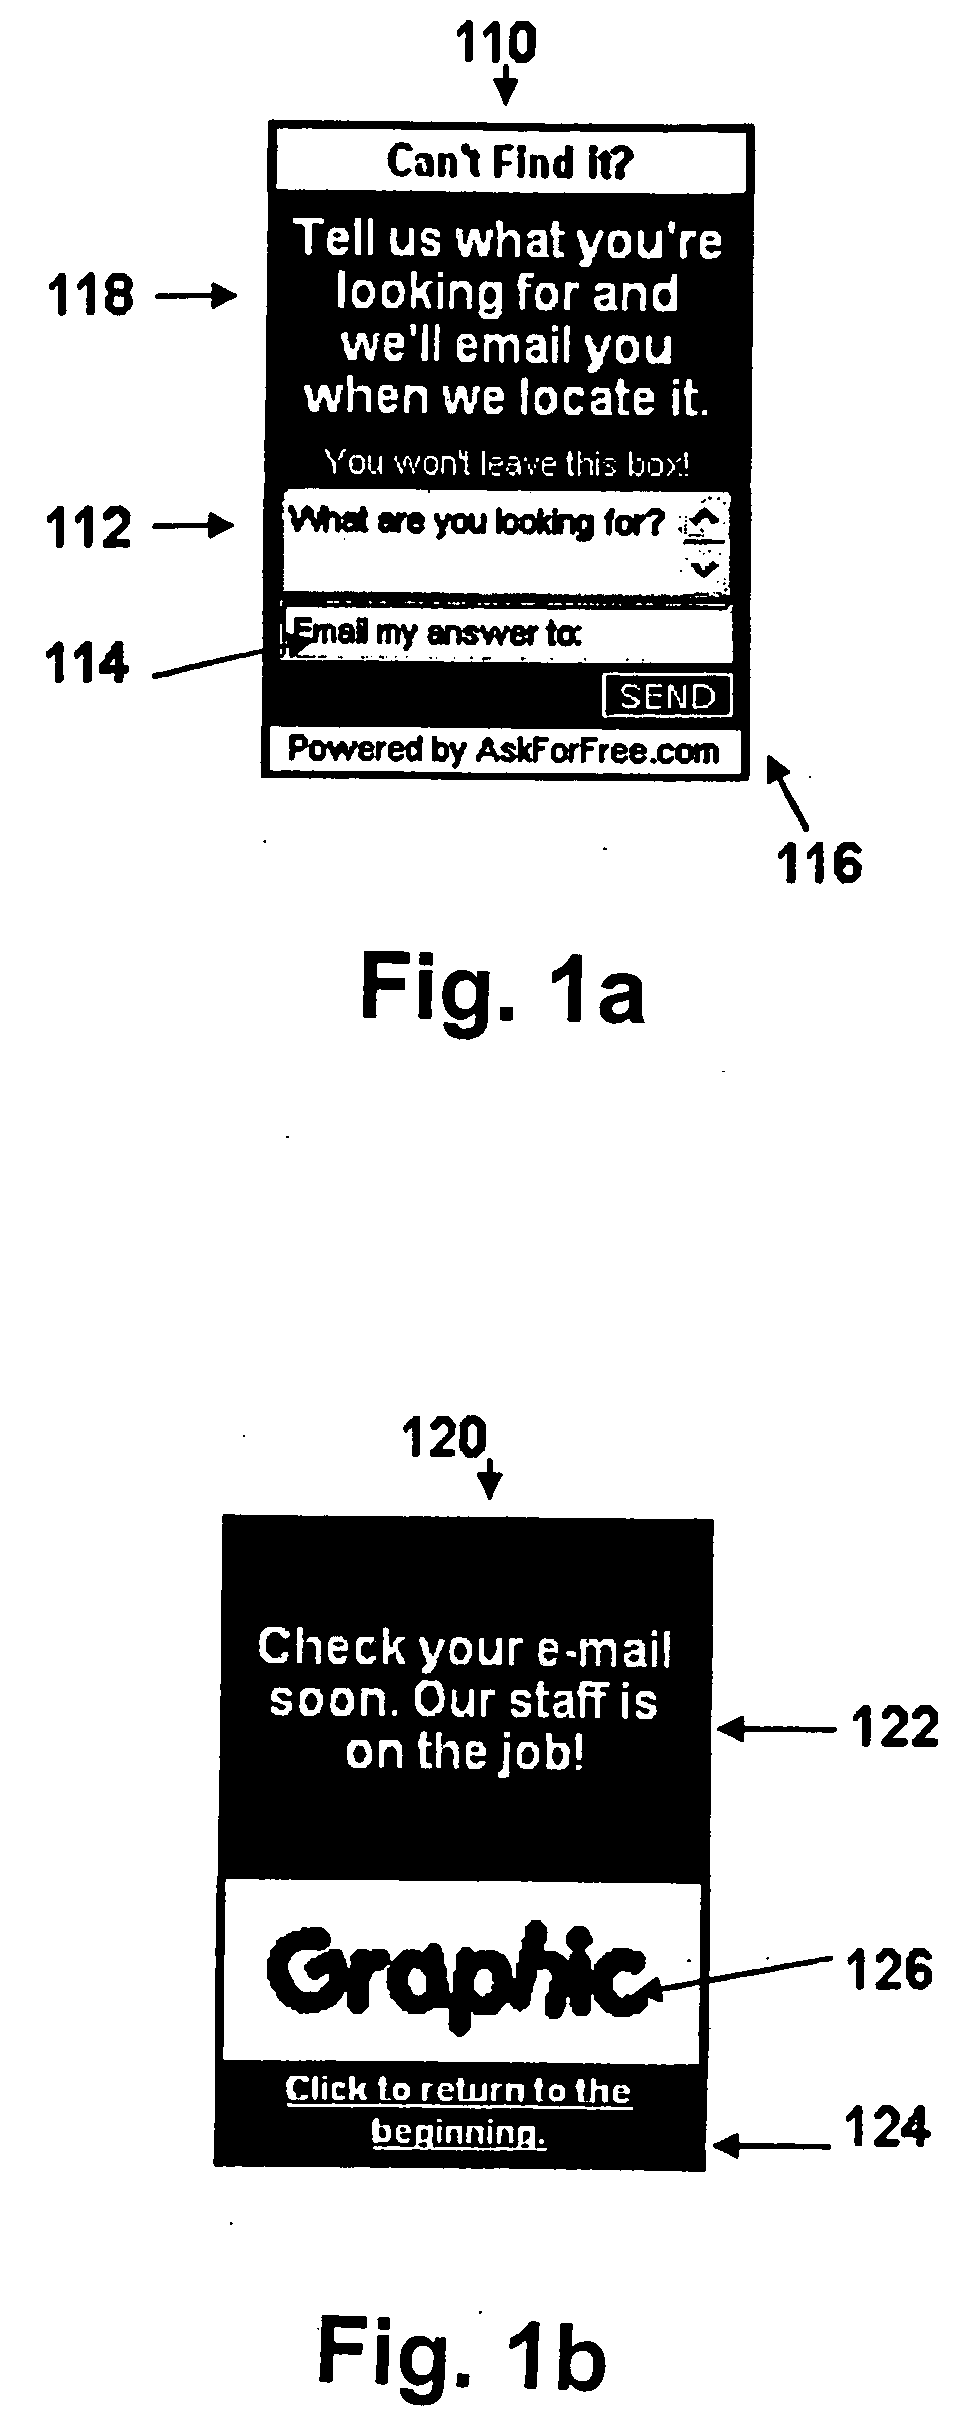 Changeable display components in an internet Web page